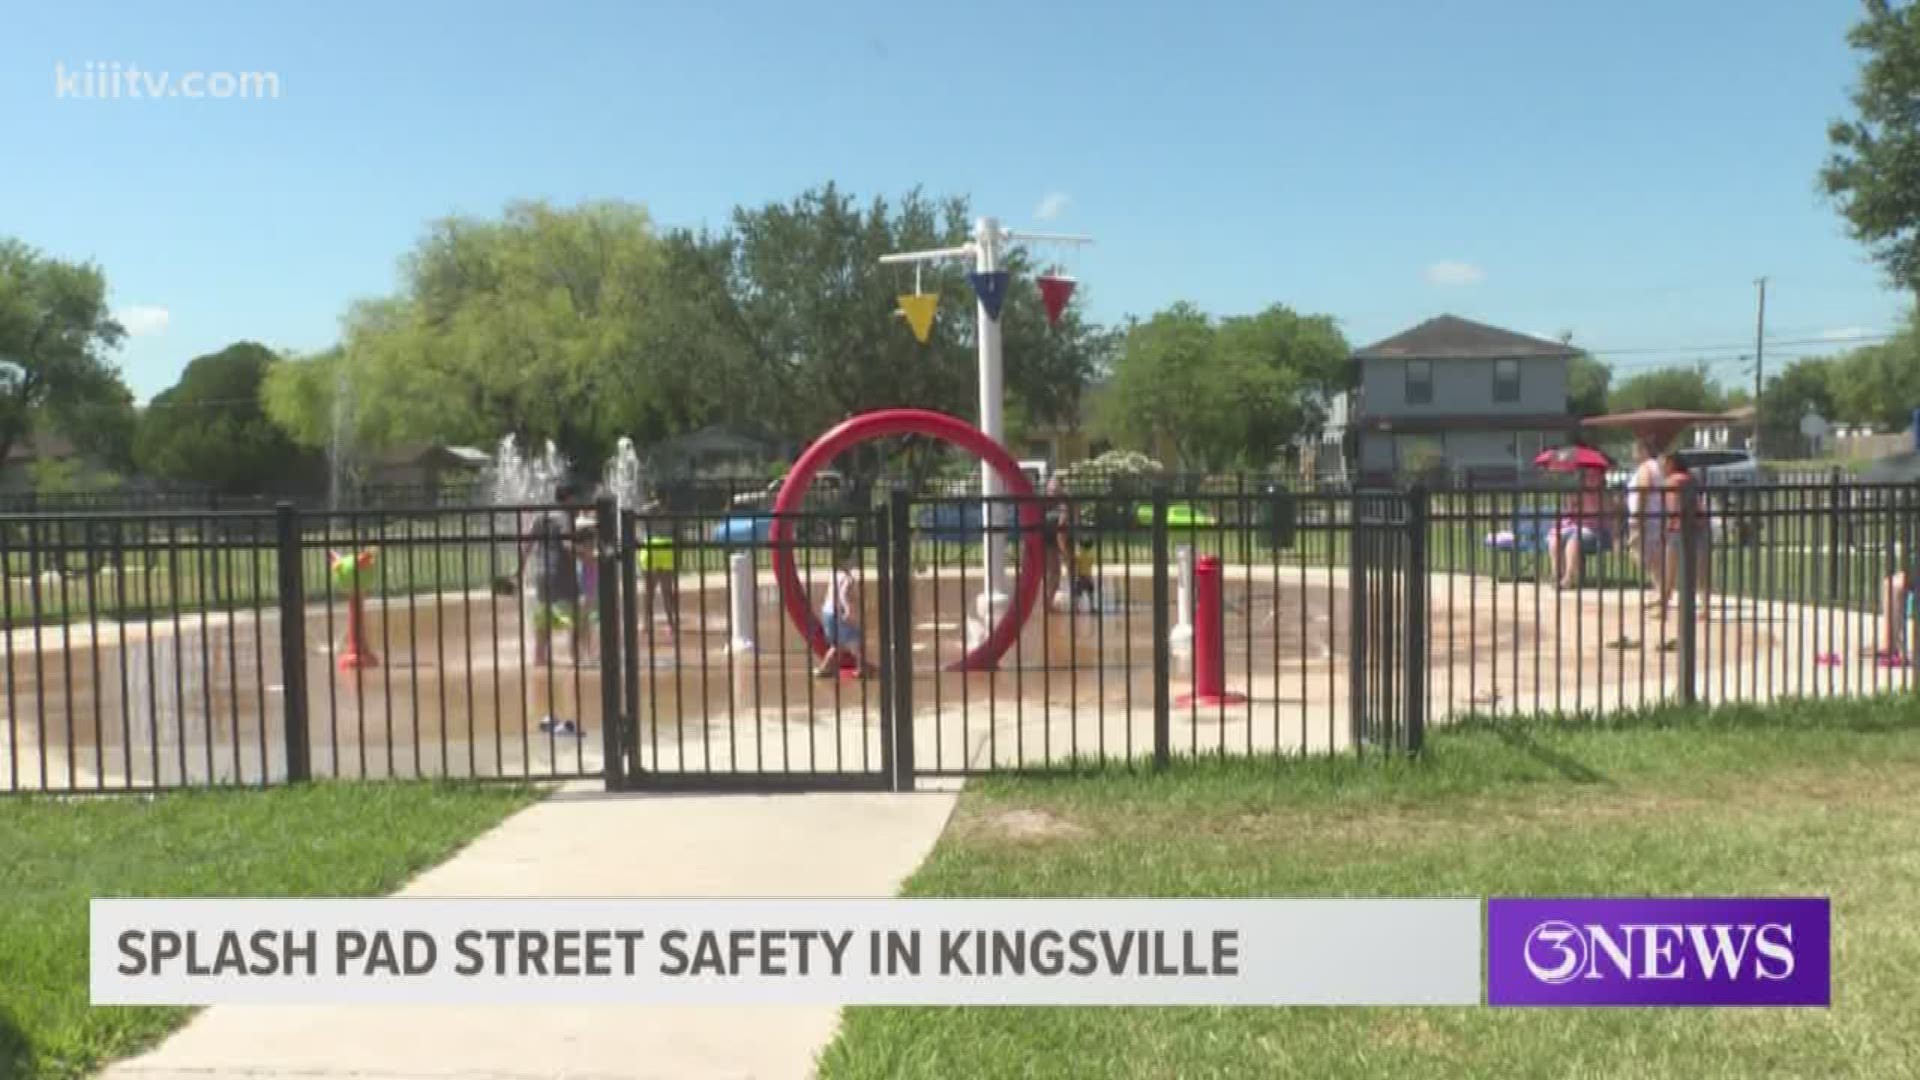 City officials said they want people who are walking to and from school or the park to be safe while crossing the road.